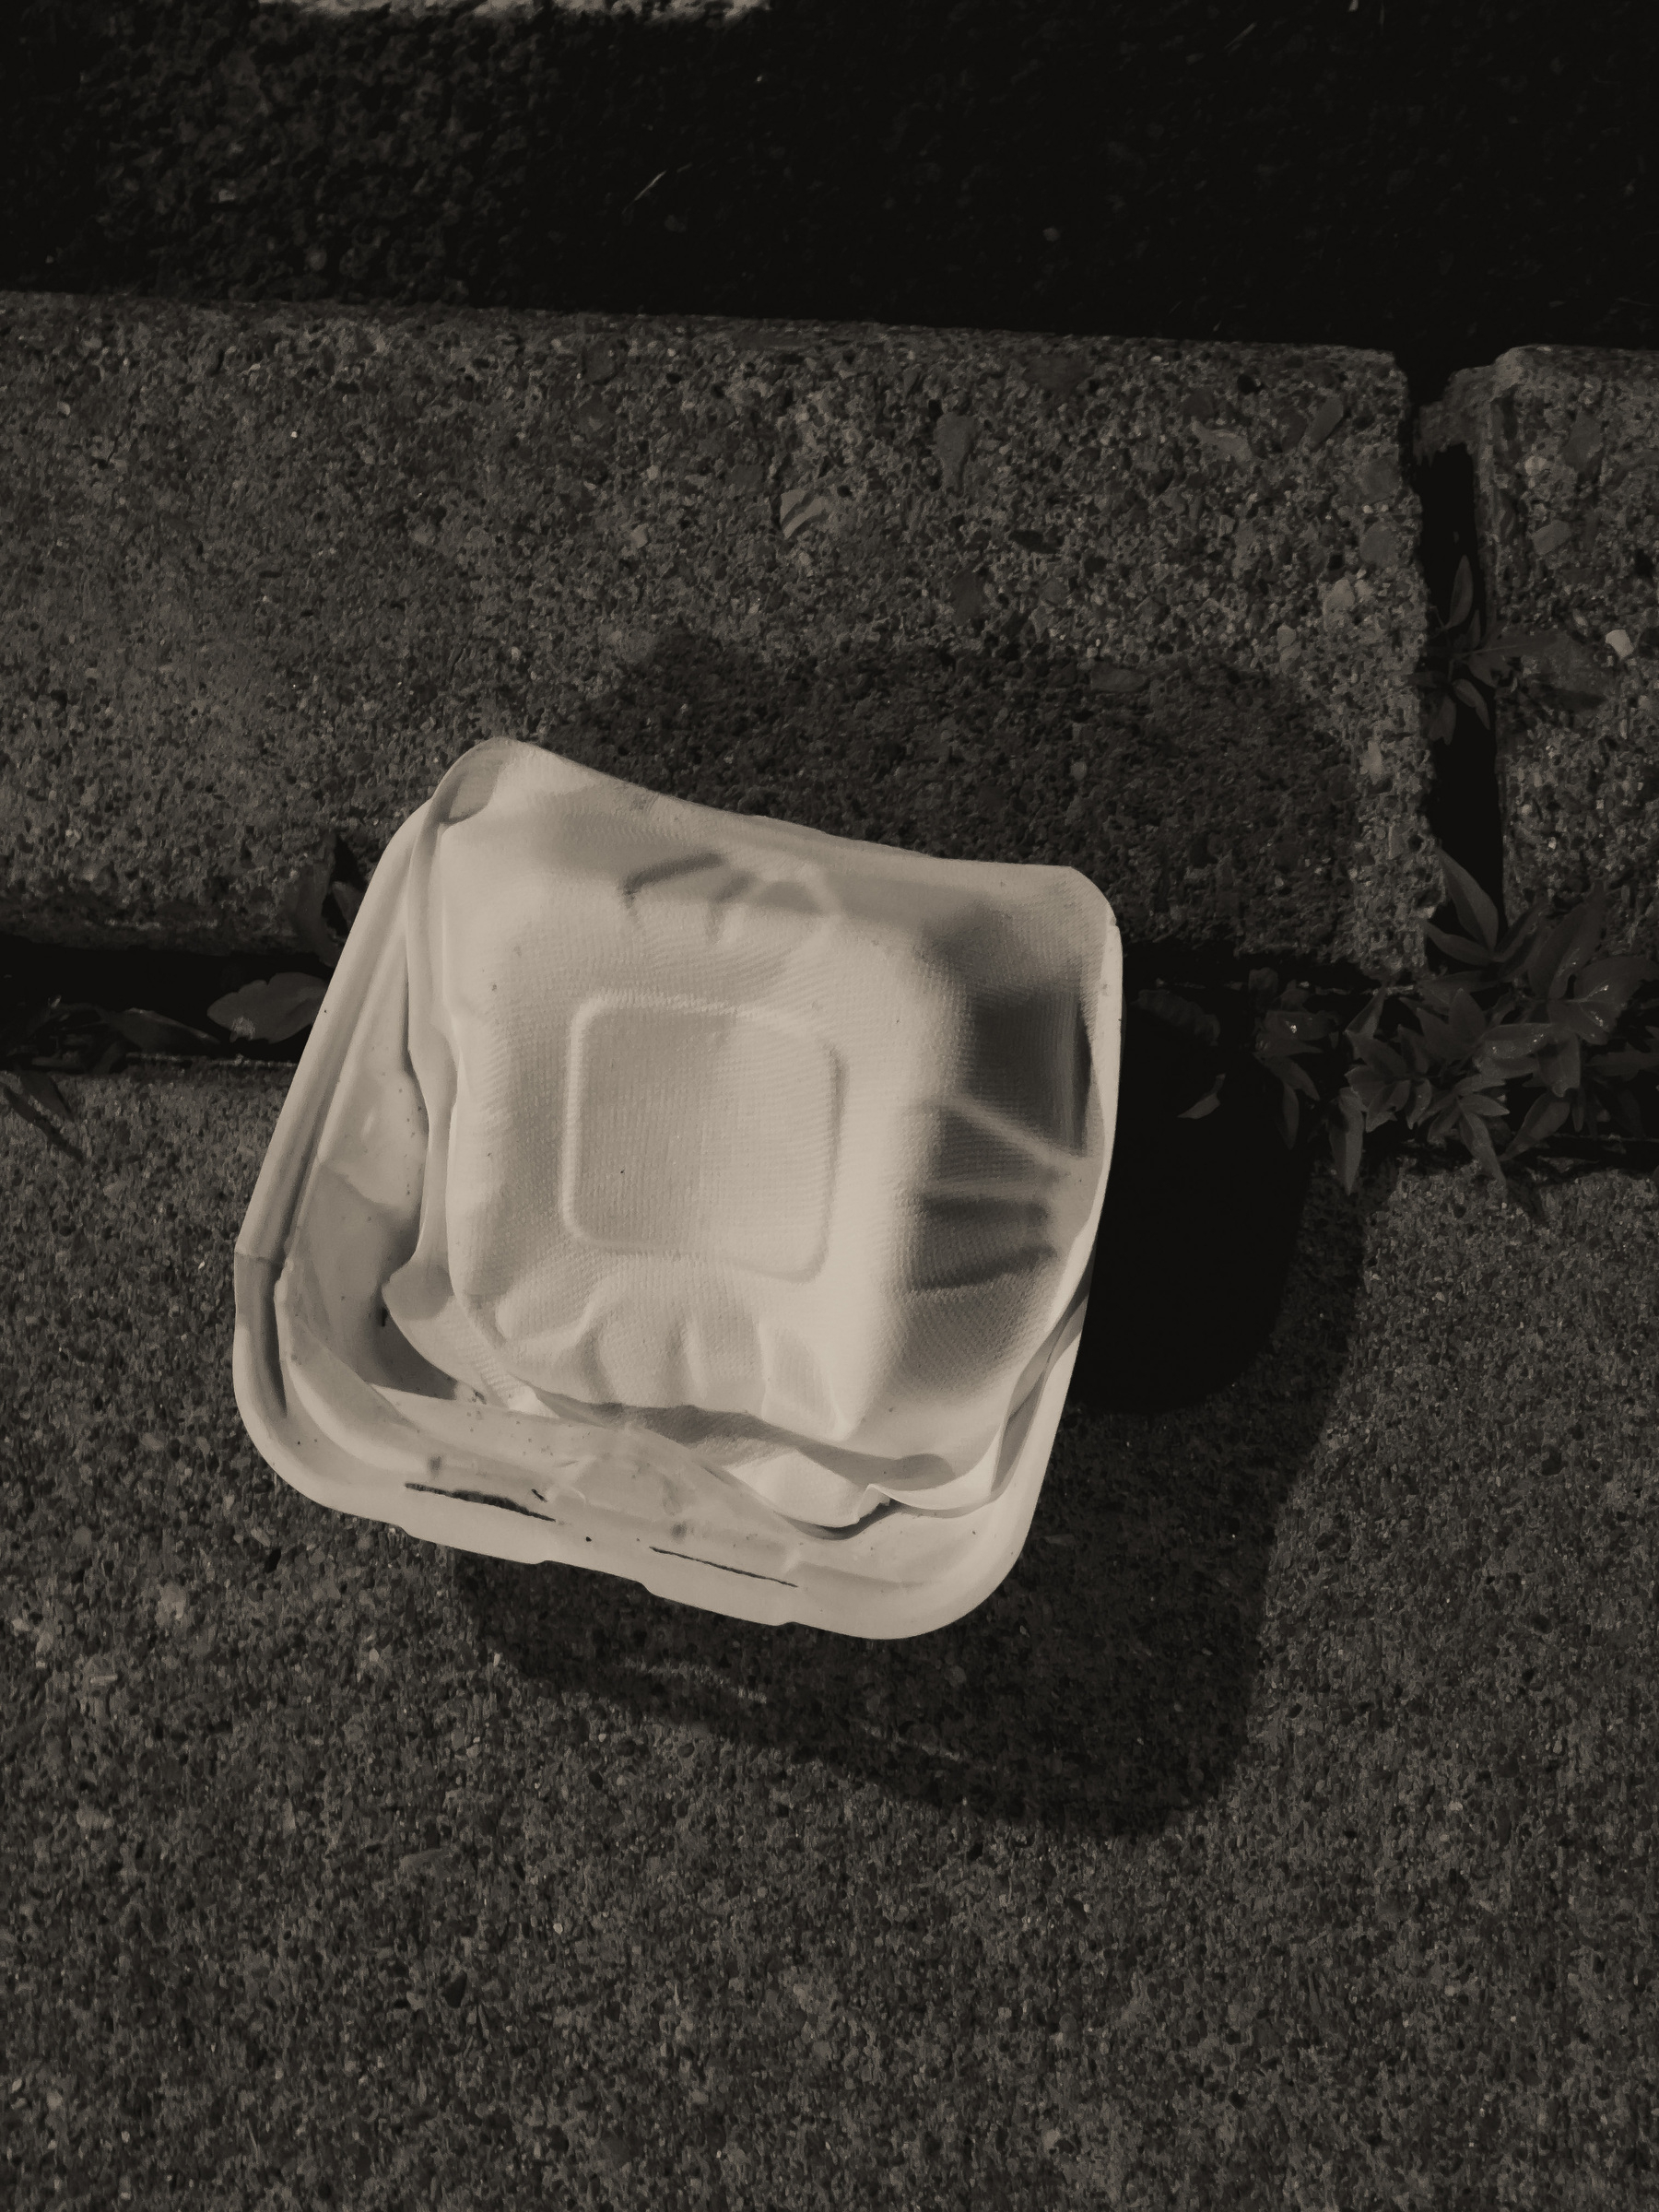 Square compostable food container on concrete pavement.